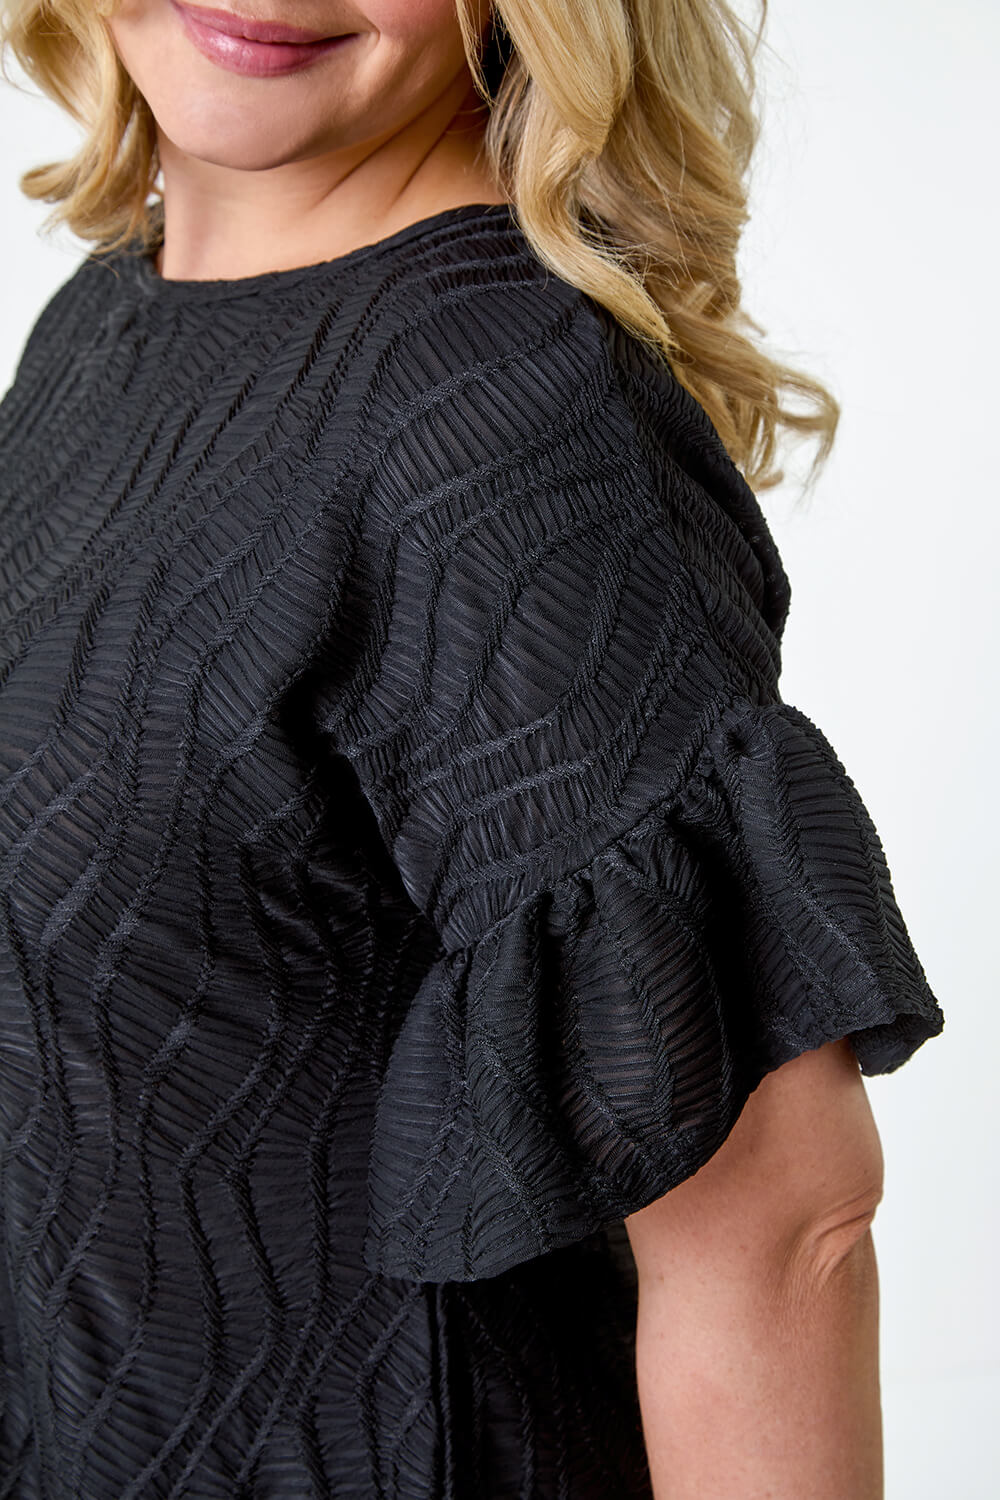 Black Curve Textured Frill Detail Stretch T-Shirt, Image 5 of 5